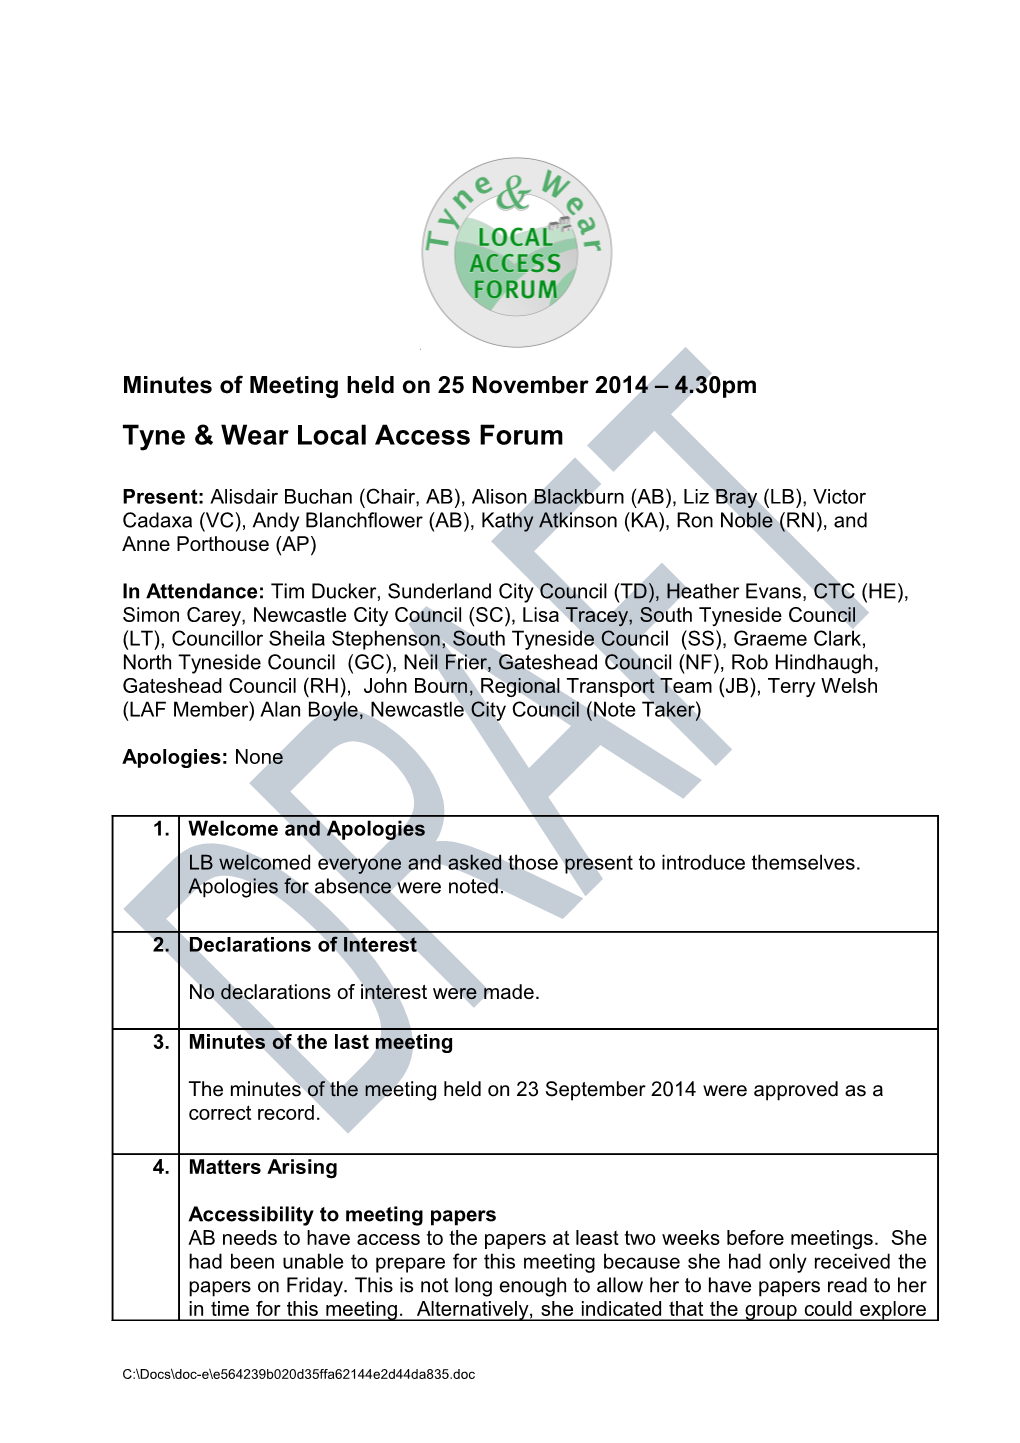 Minutes of Meeting Held on 25 November 2014 4.30Pm